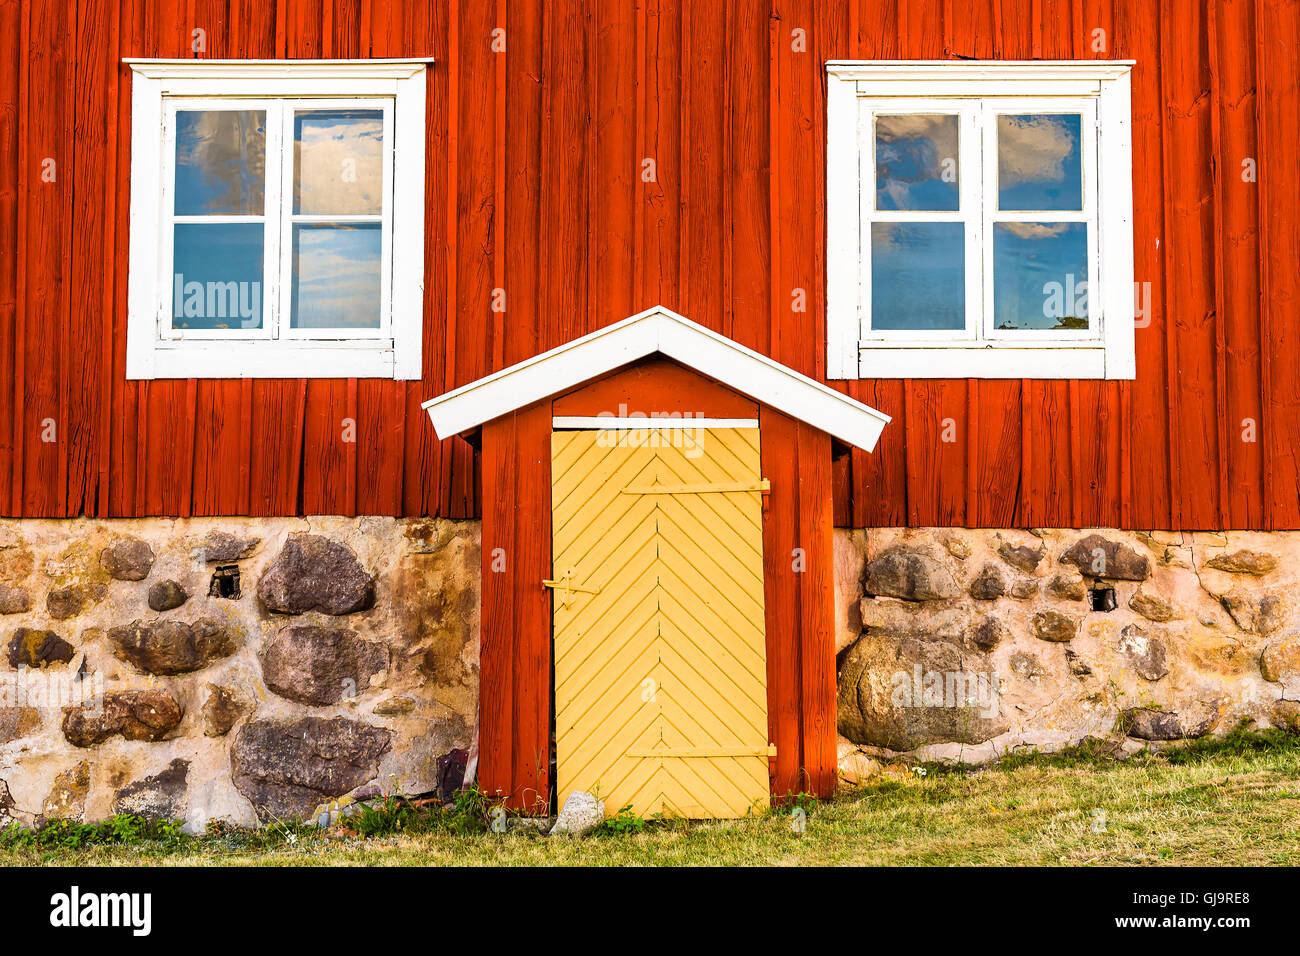 Lovely vintage yellow door on a bright red house with white details. Stock Photo